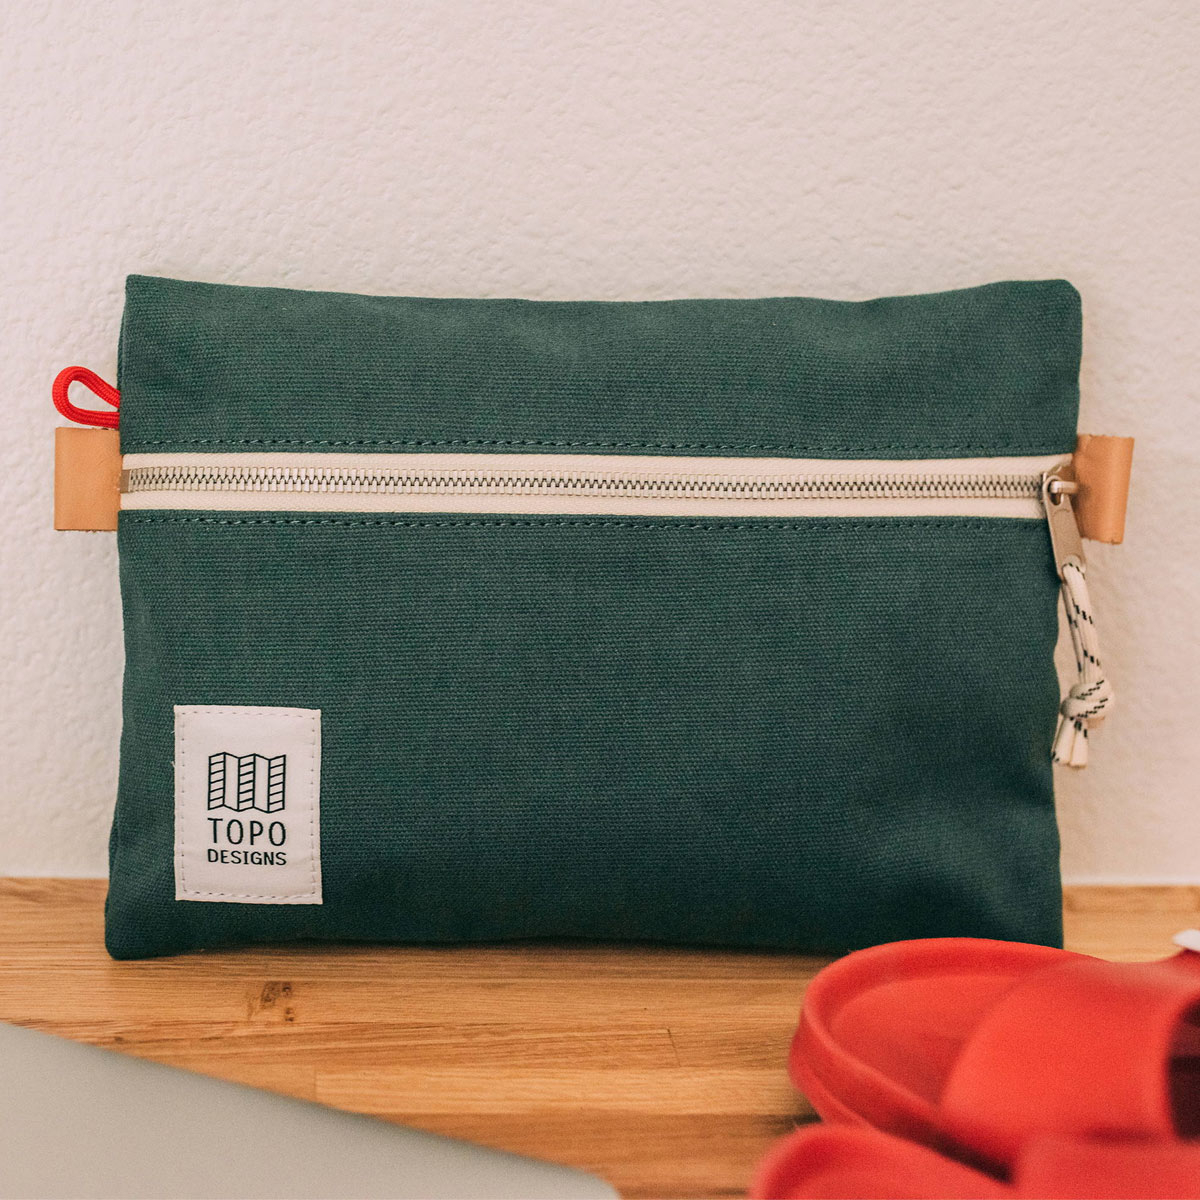 Topo Designs Accessory Bags Canvas Forest 3 Sizes, built for durability and organization